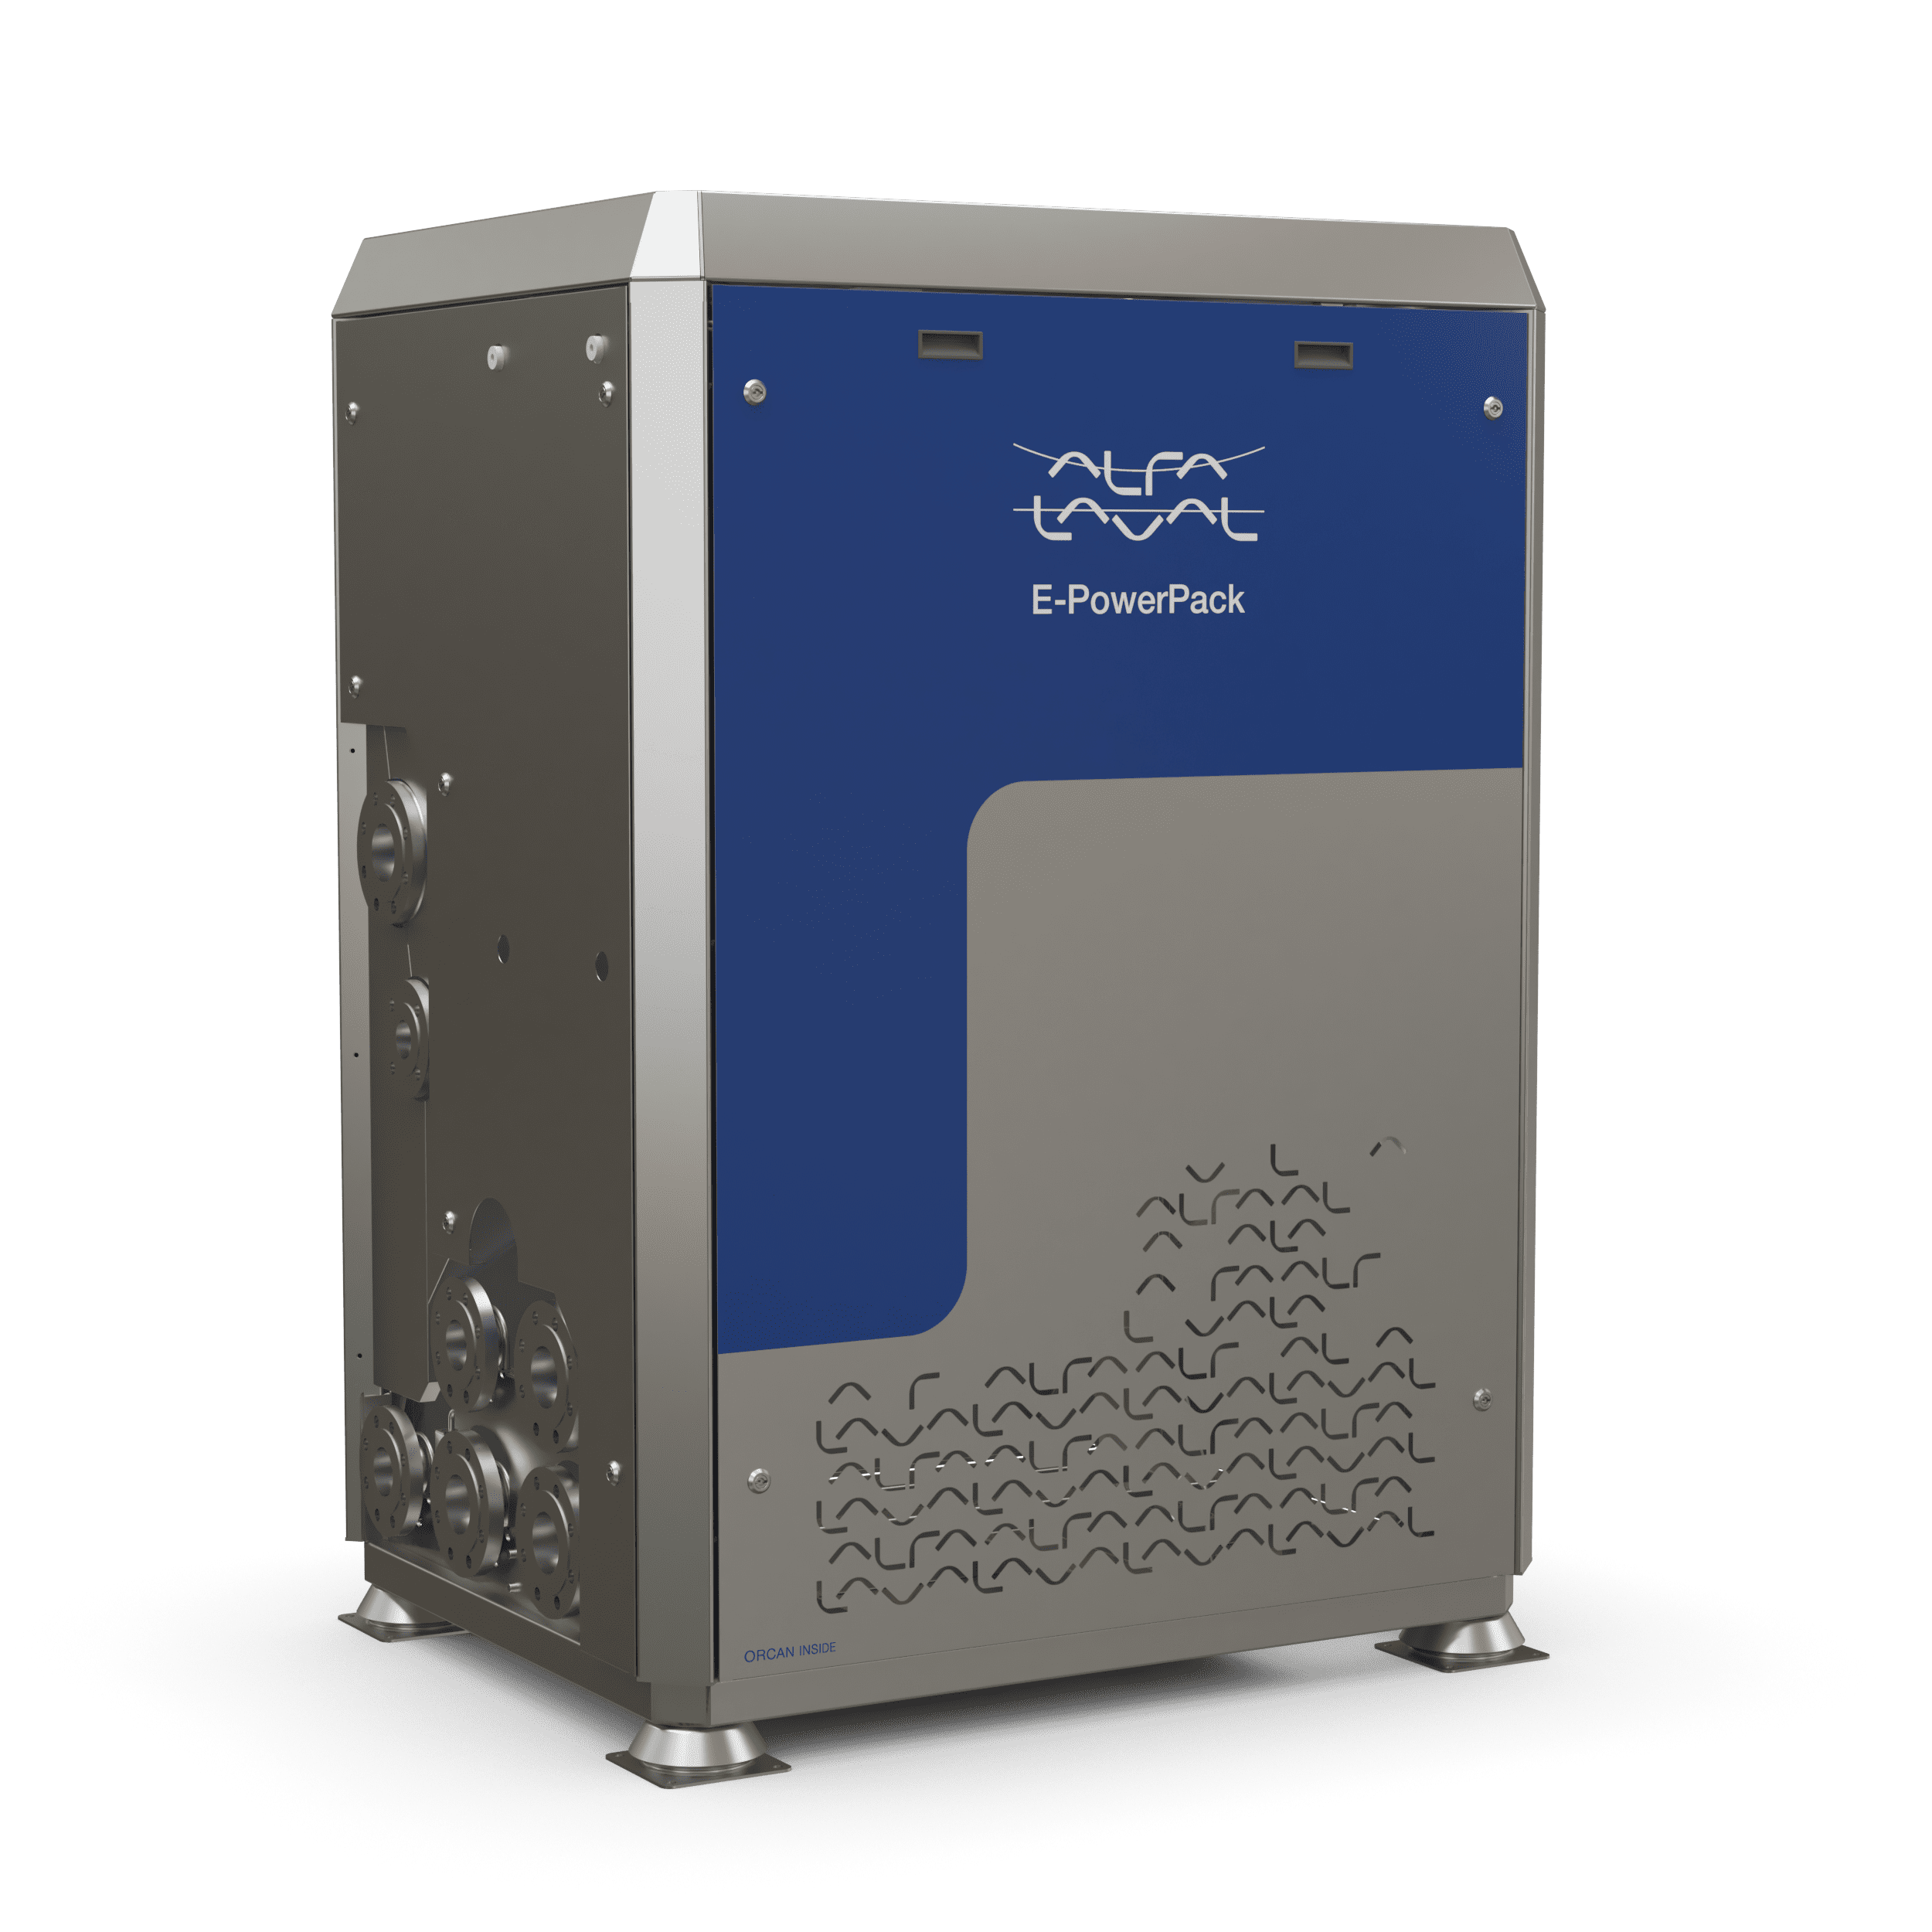 Introducing the Alfa Laval E-PowerPack – a game-changing advance in marine sustainability